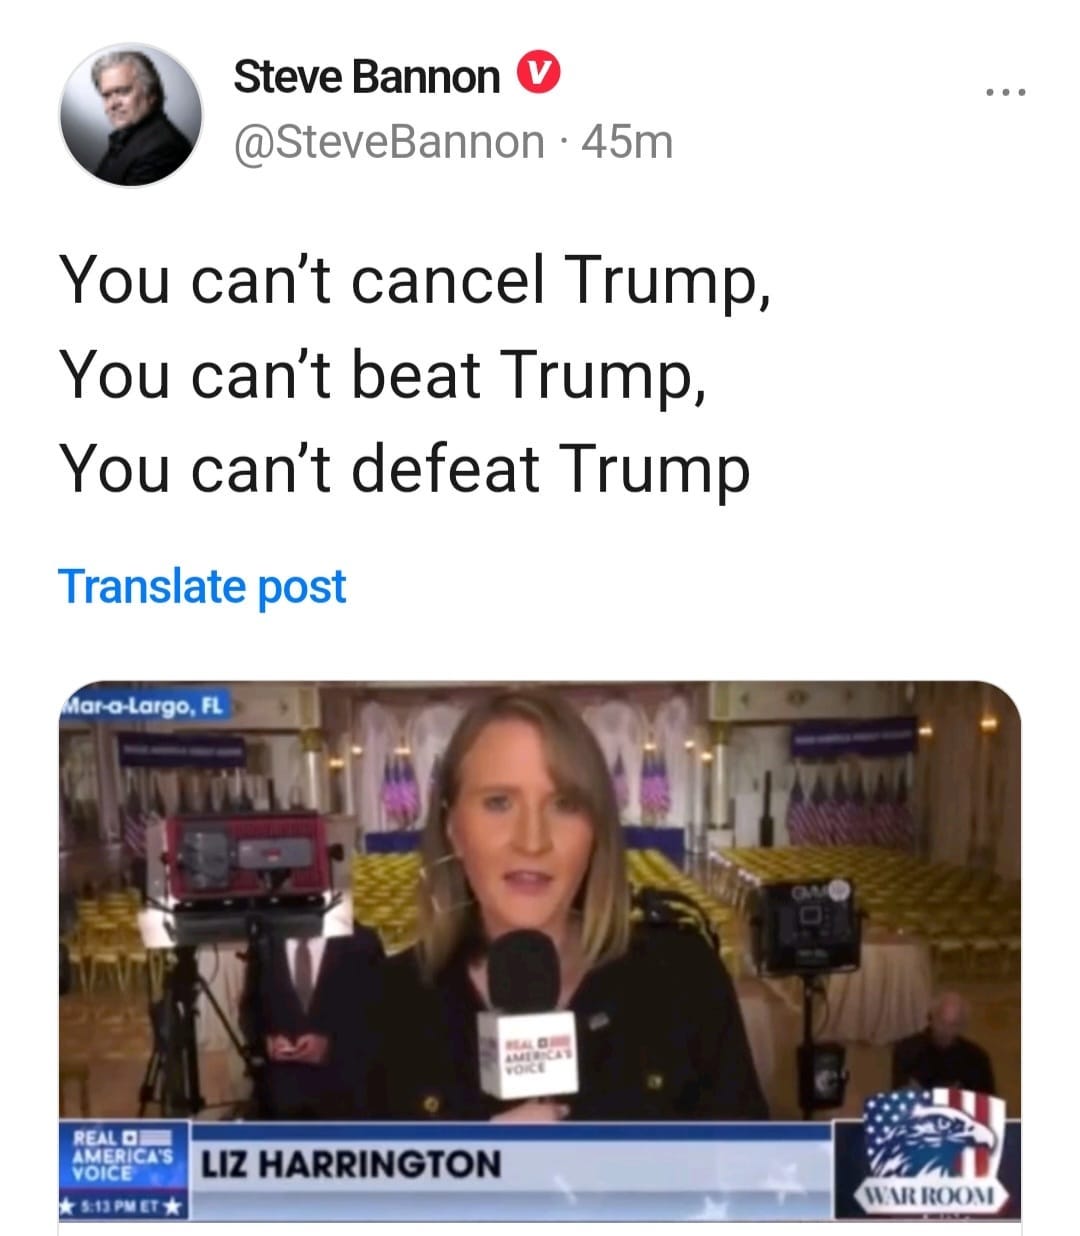 May be a Twitter screenshot of 3 people, people standing and text that says 'Steve Bannon @SteveBannon 45m You can't cancel Trump, You can't beat Trump, You can't defeat Trump Translate post Mar-a-Largo, FOCO REAL AMERICA VOICE LIZ HARRINGTON S:13PMET* WAR ROOM'